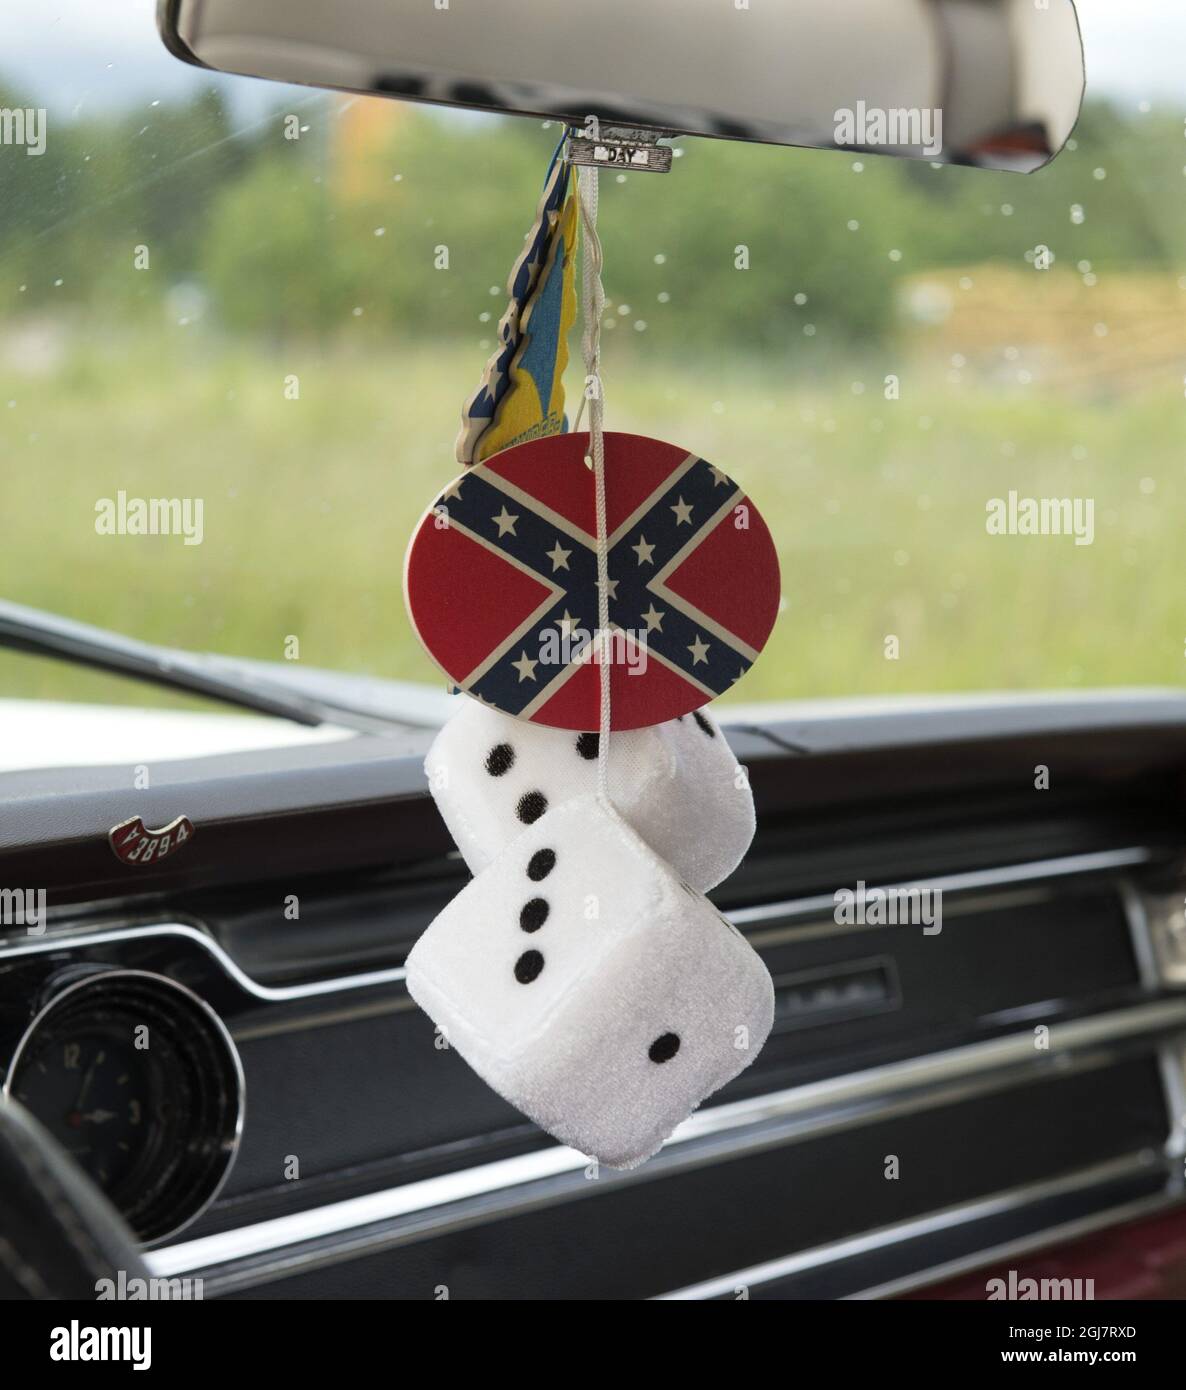 Fuzzy Dice Hanging From a Rear-View Mirror in Vintage Car Stock Photo -  Alamy